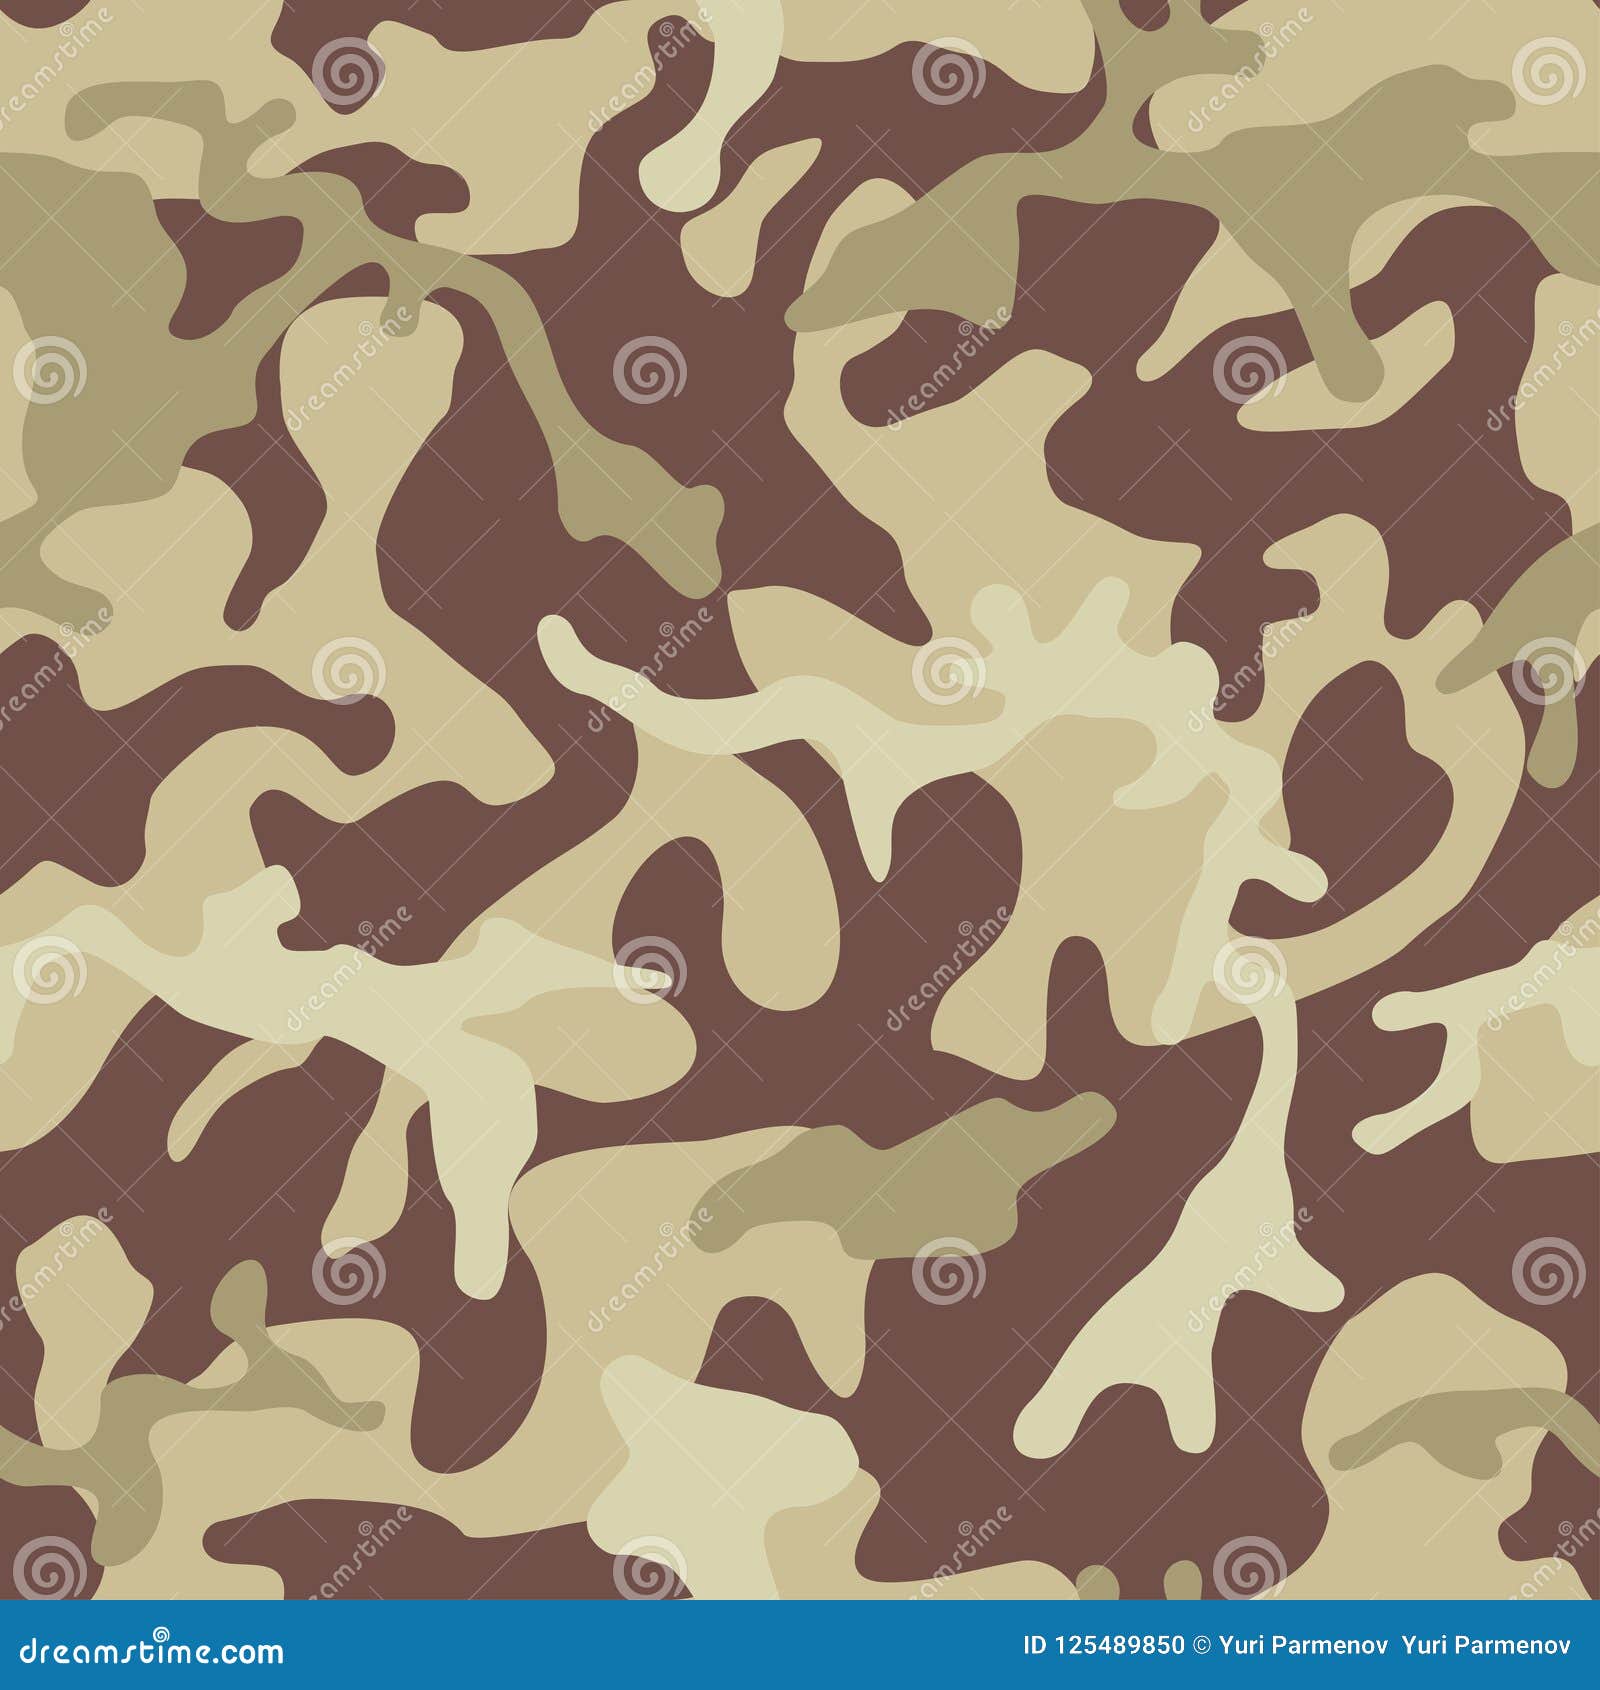 Camouflage Pattern Background. Seamless Military Texture. Stock Vector ...